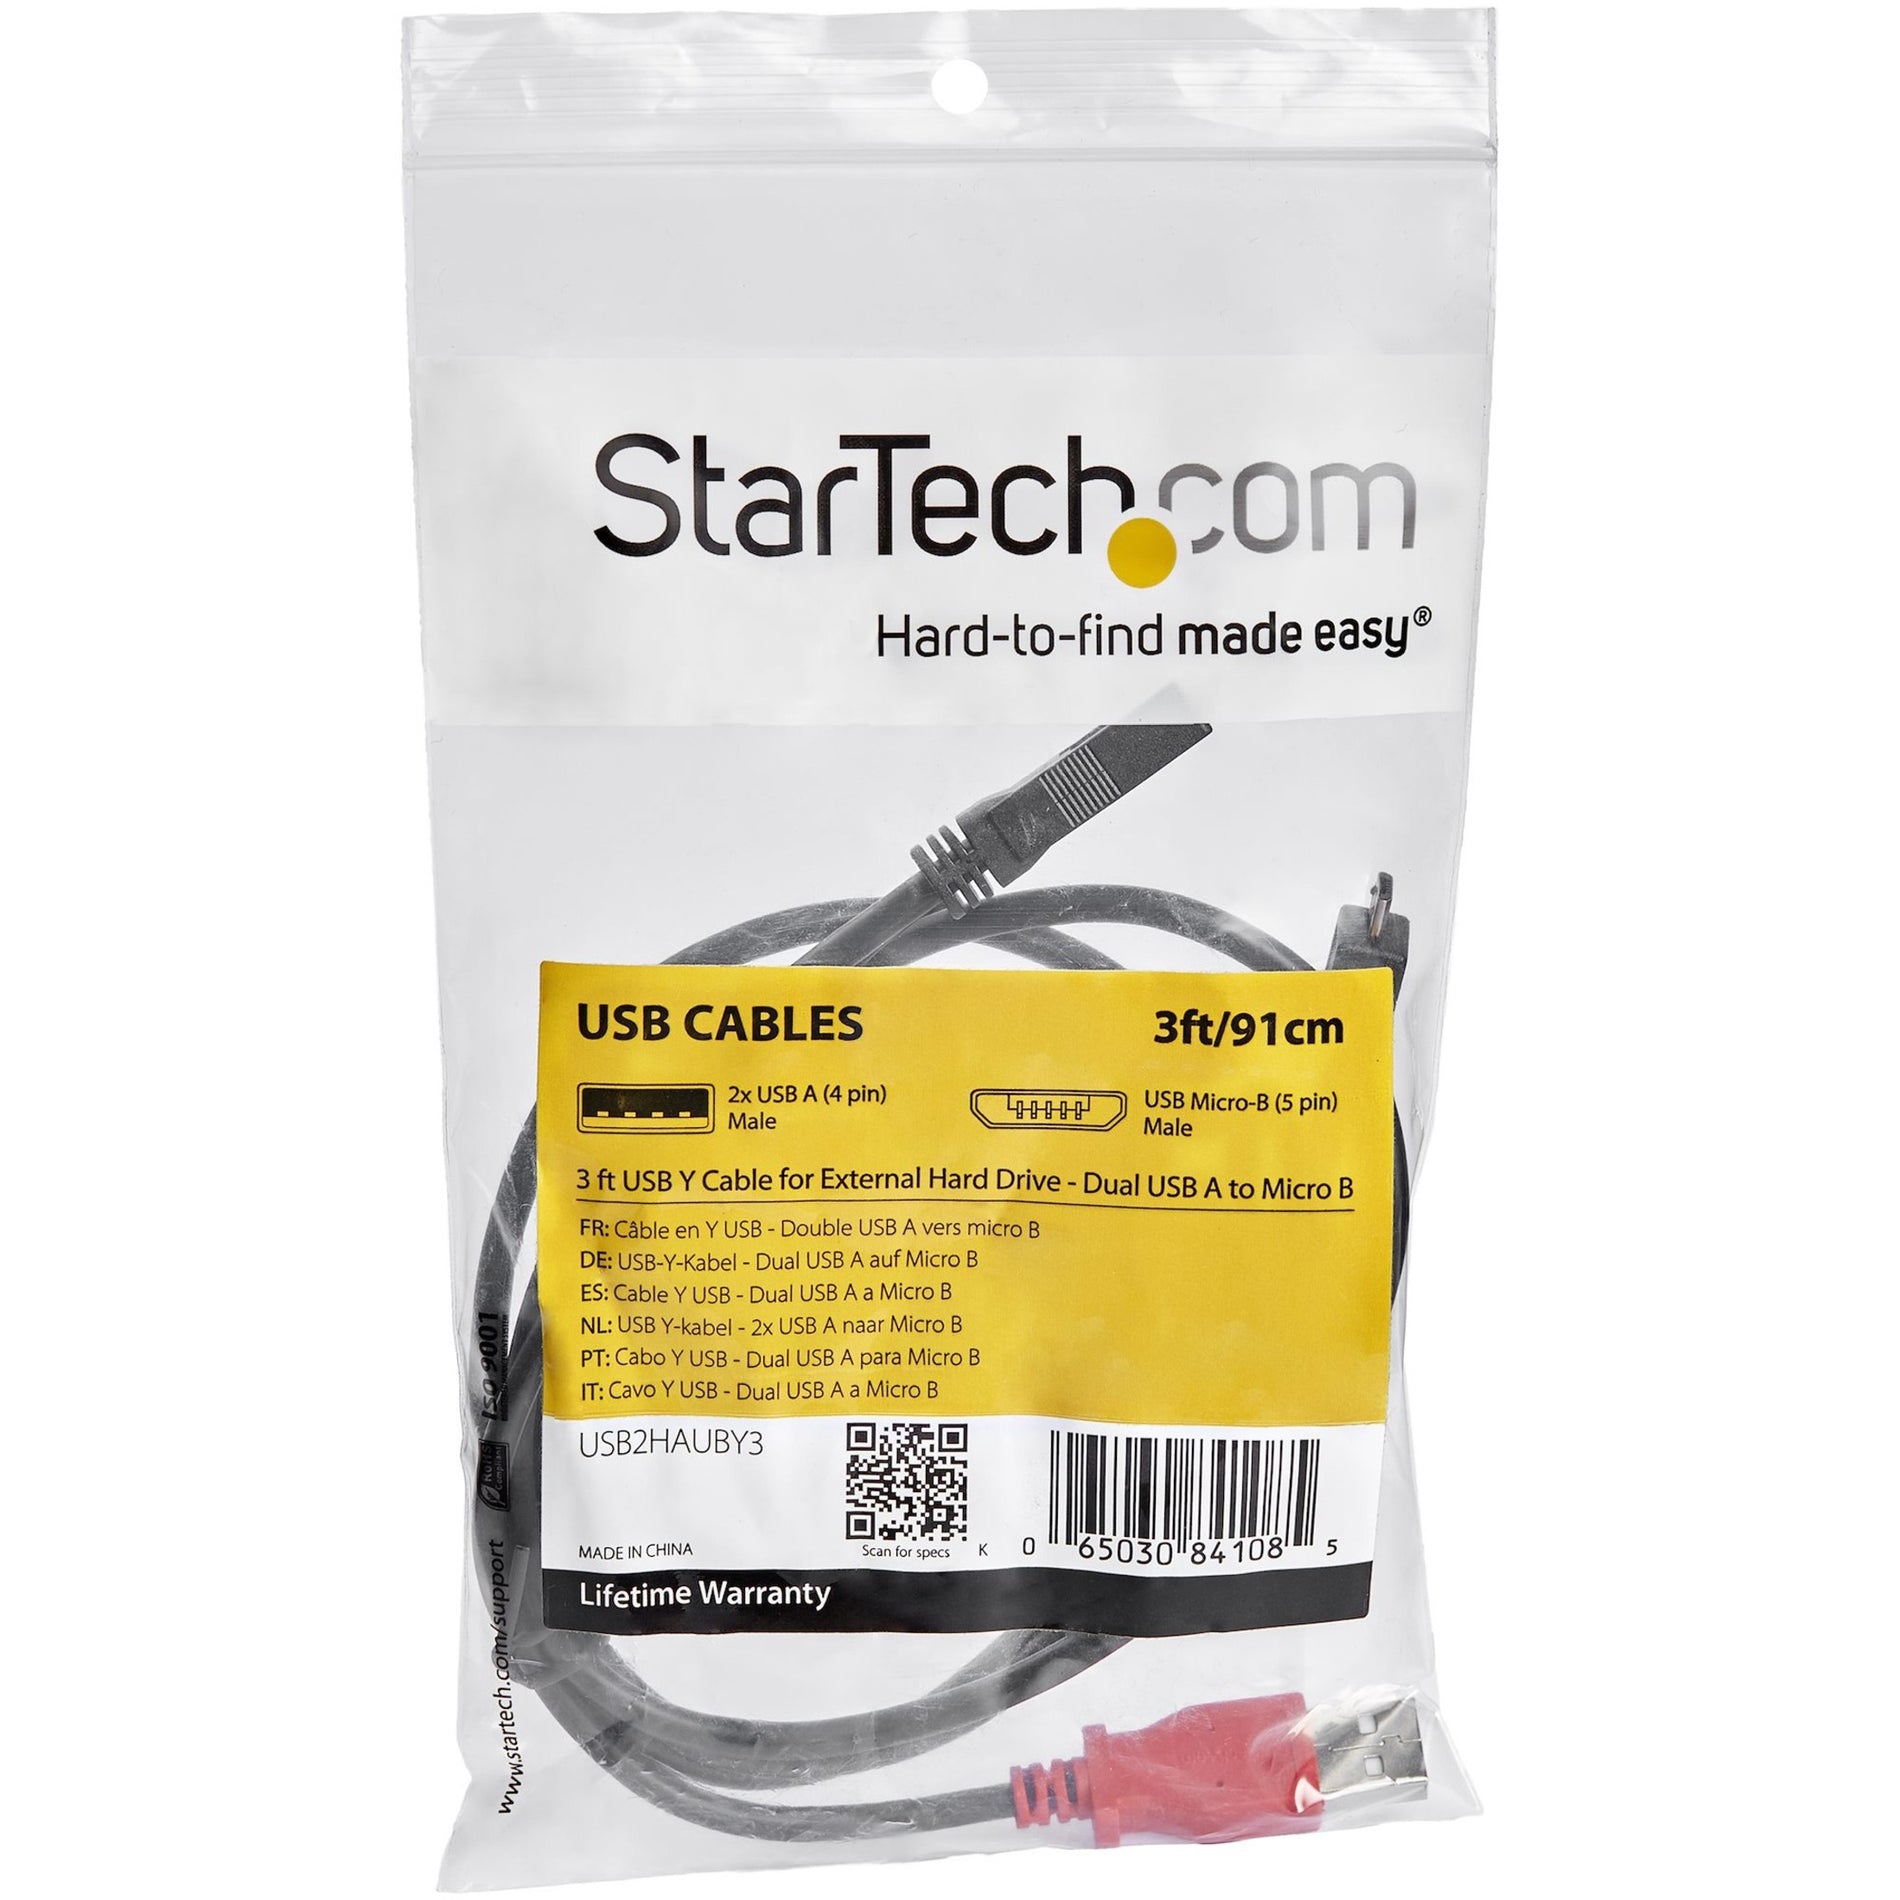 StarTech.com USB2HAUBY3 3 ft USB Y Cable for External Hard Drive - Dual USB A to Micro B, Data Transfer Cable, 480 Mbit/s [Discontinued]